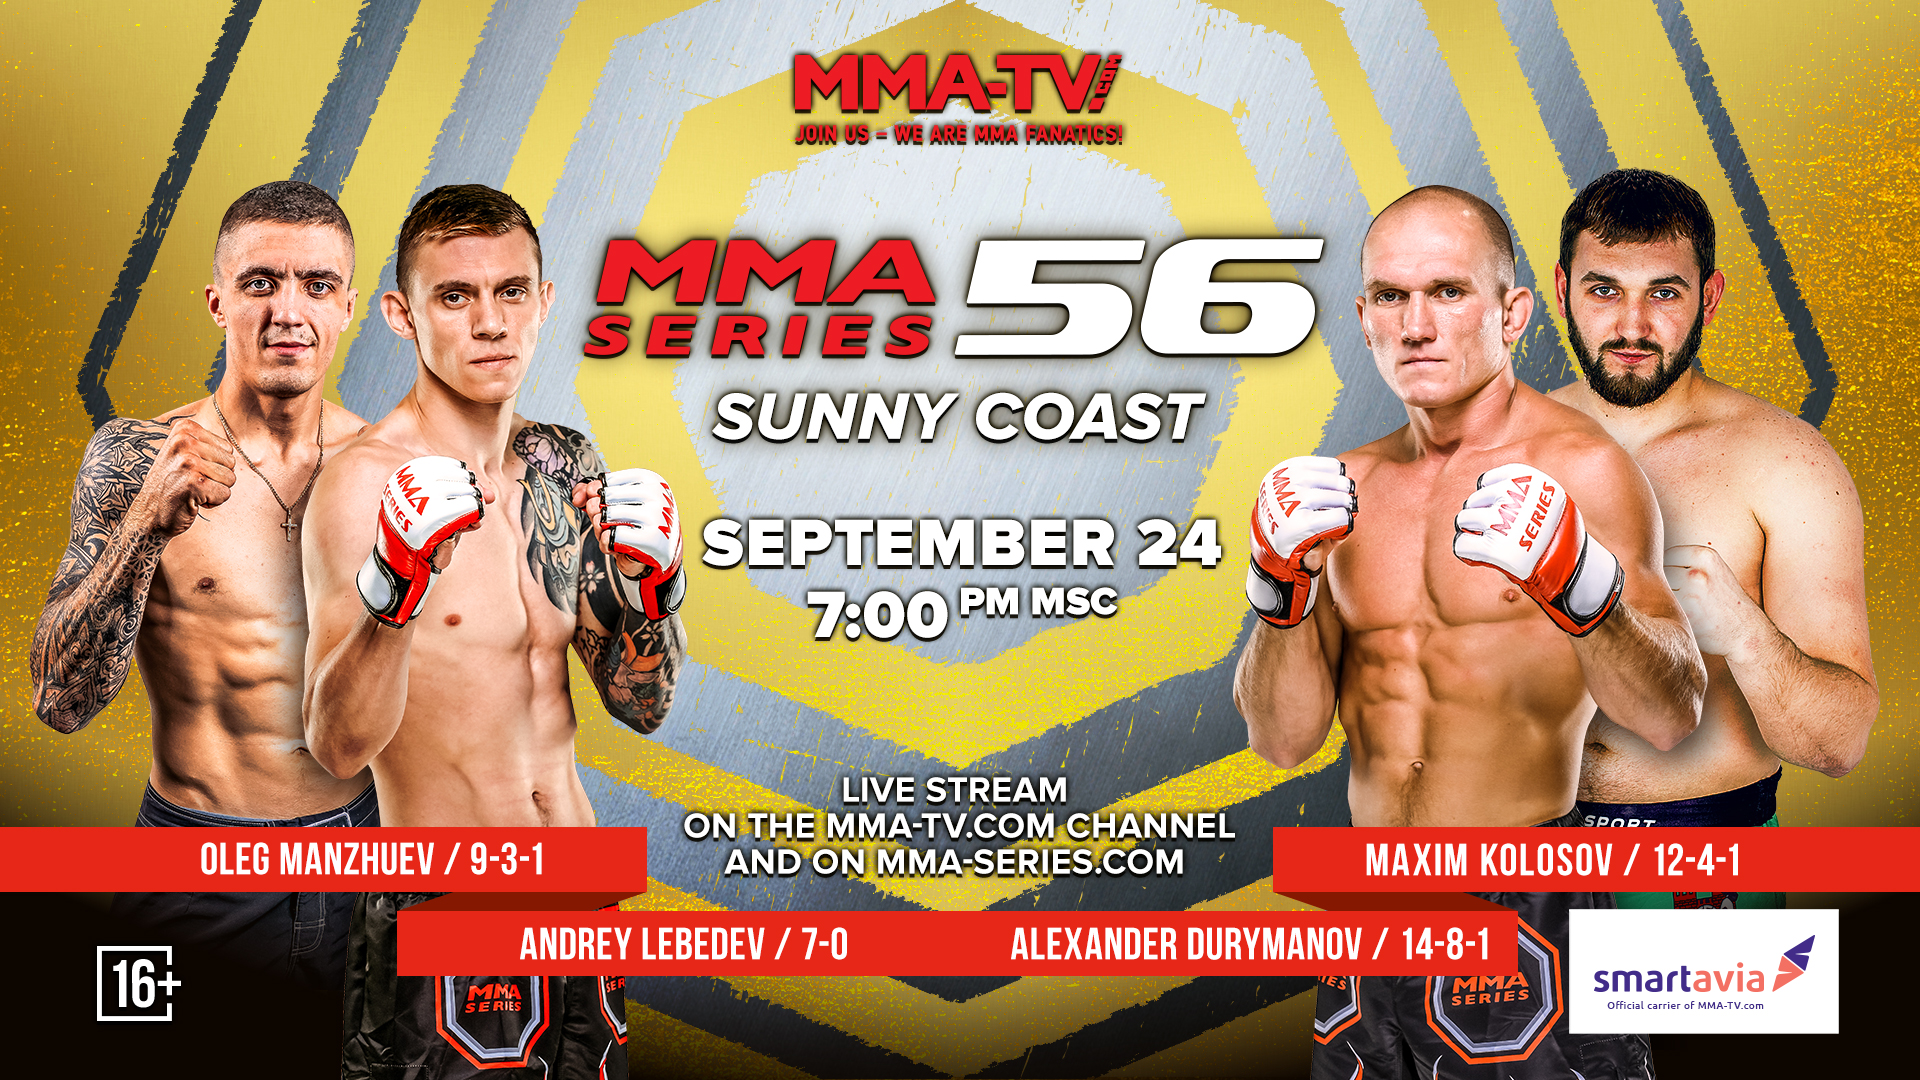 MMA Series official website